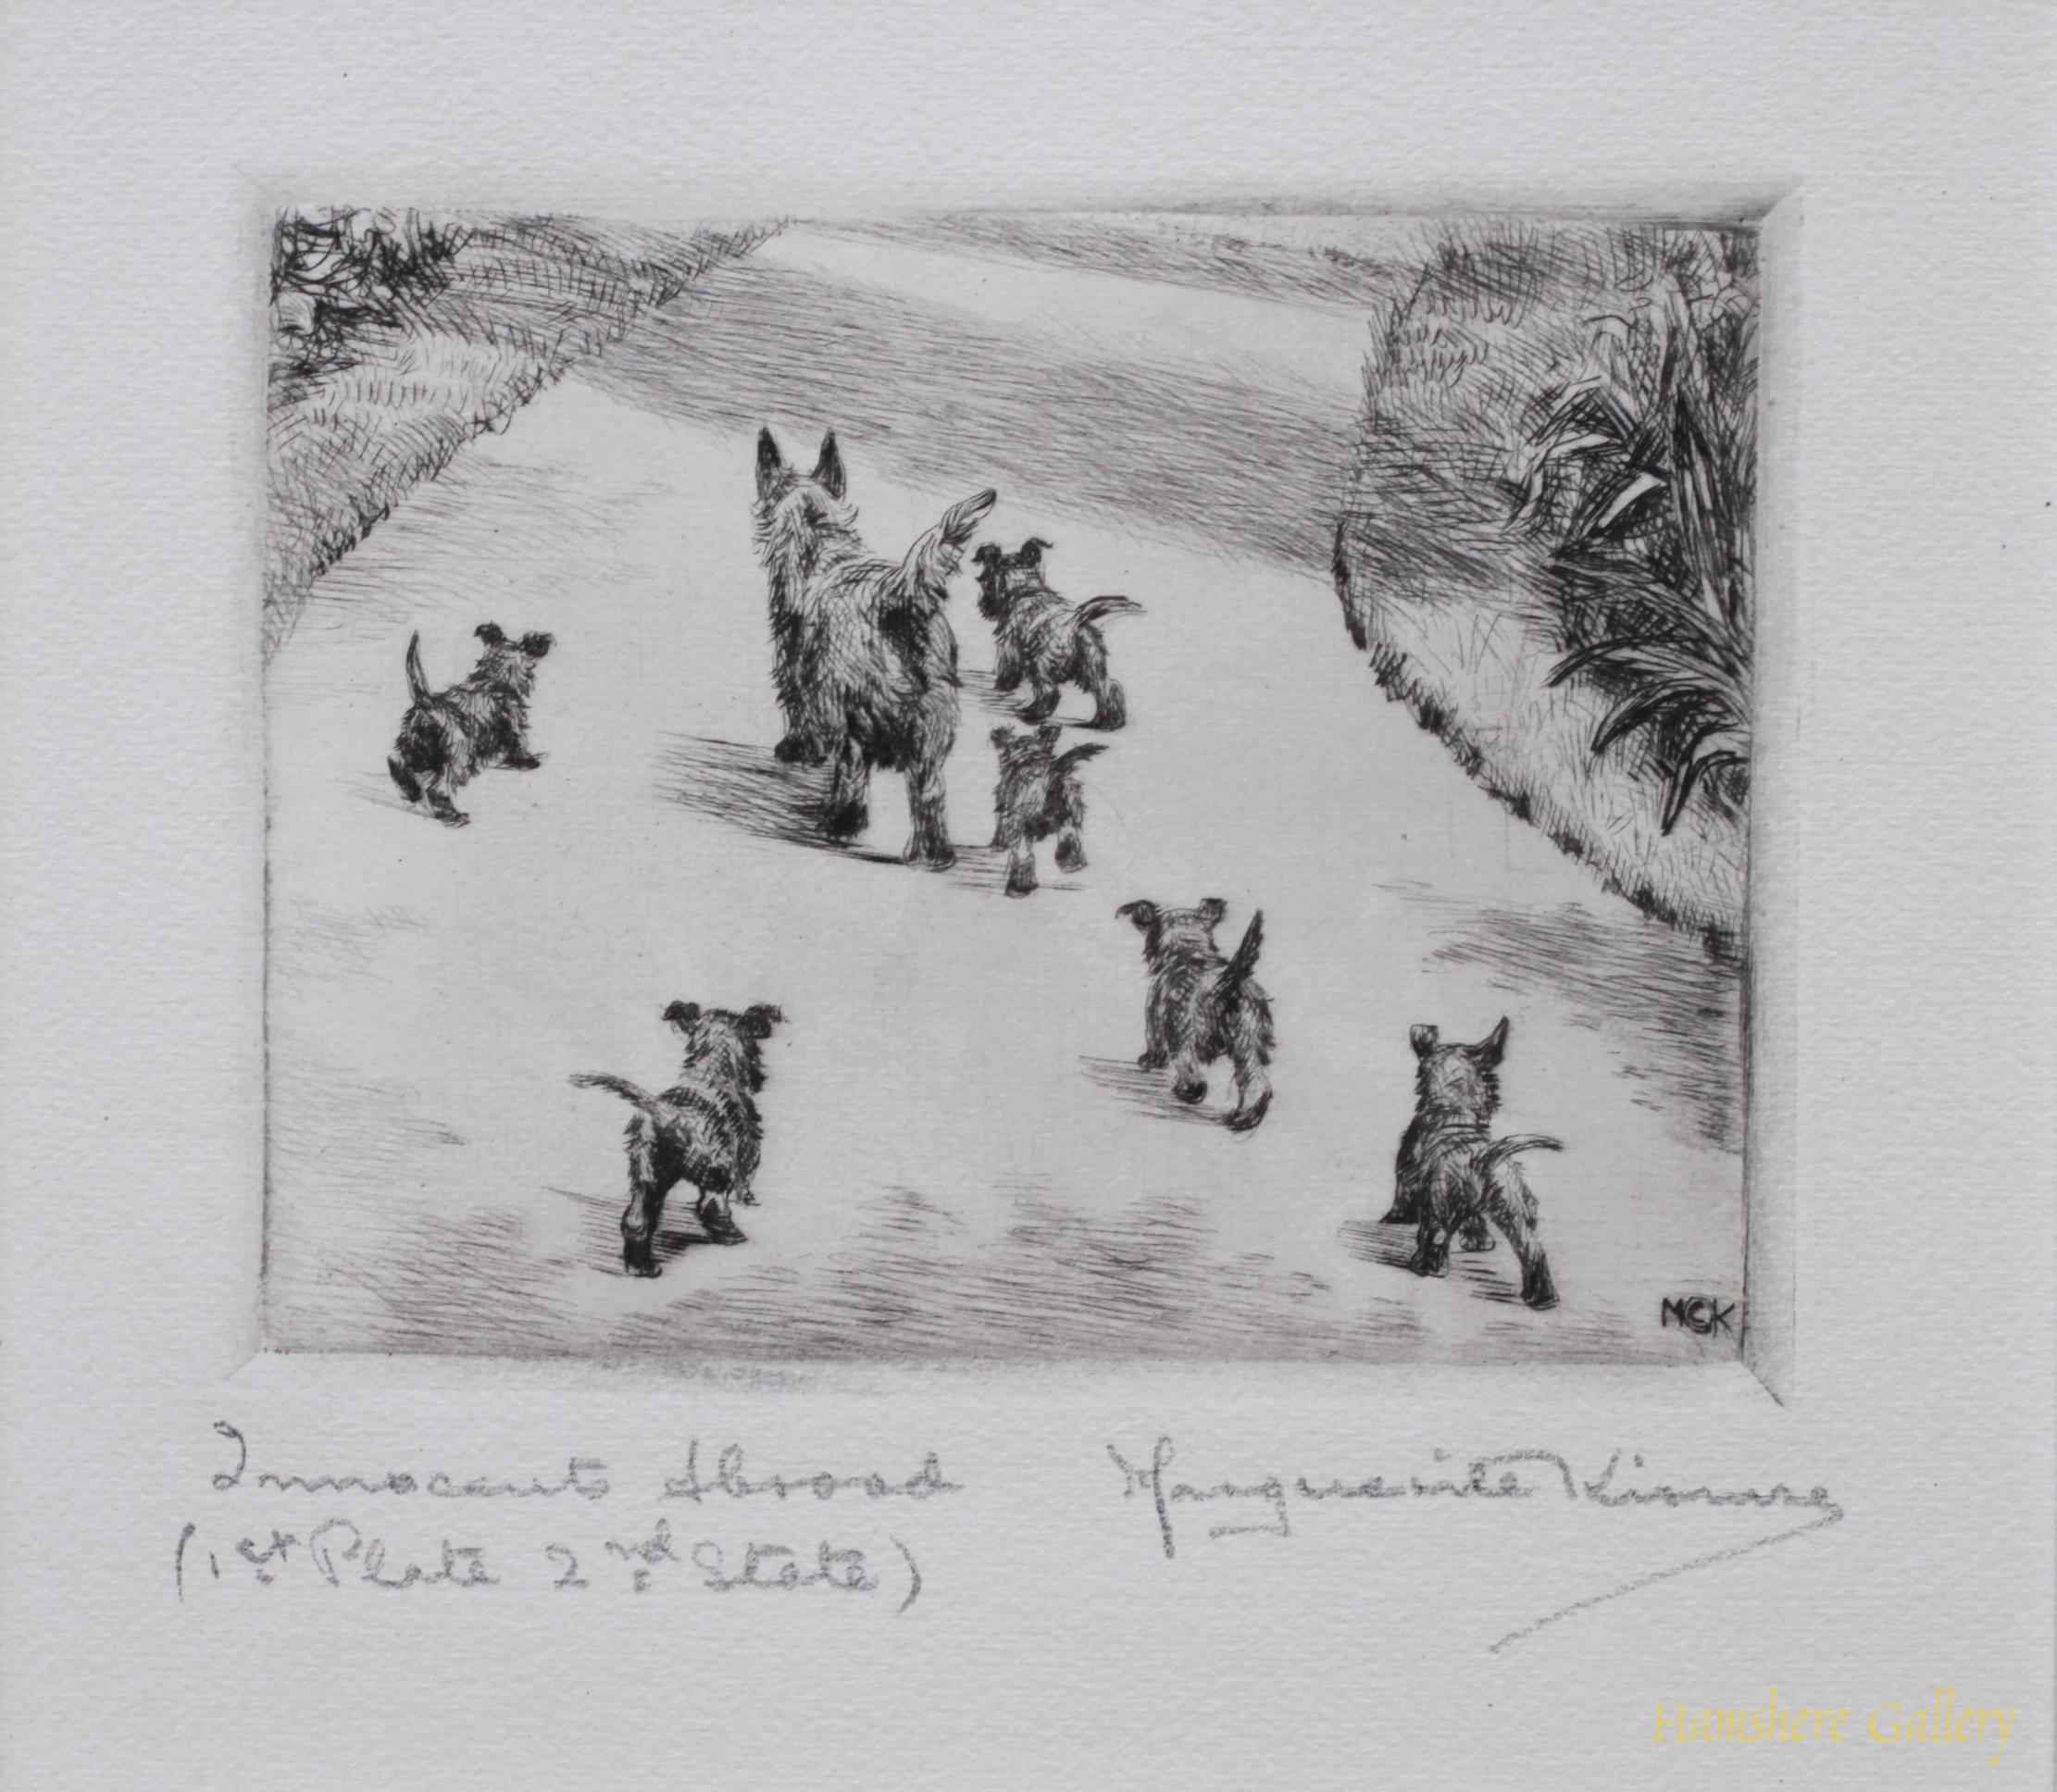 Click for larger image: Scottish Terrier dry-point etching Innocents Abroadby Marguerite Kirmse - Scottish Terrier dry-point etching Innocents Abroadby Marguerite Kirmse